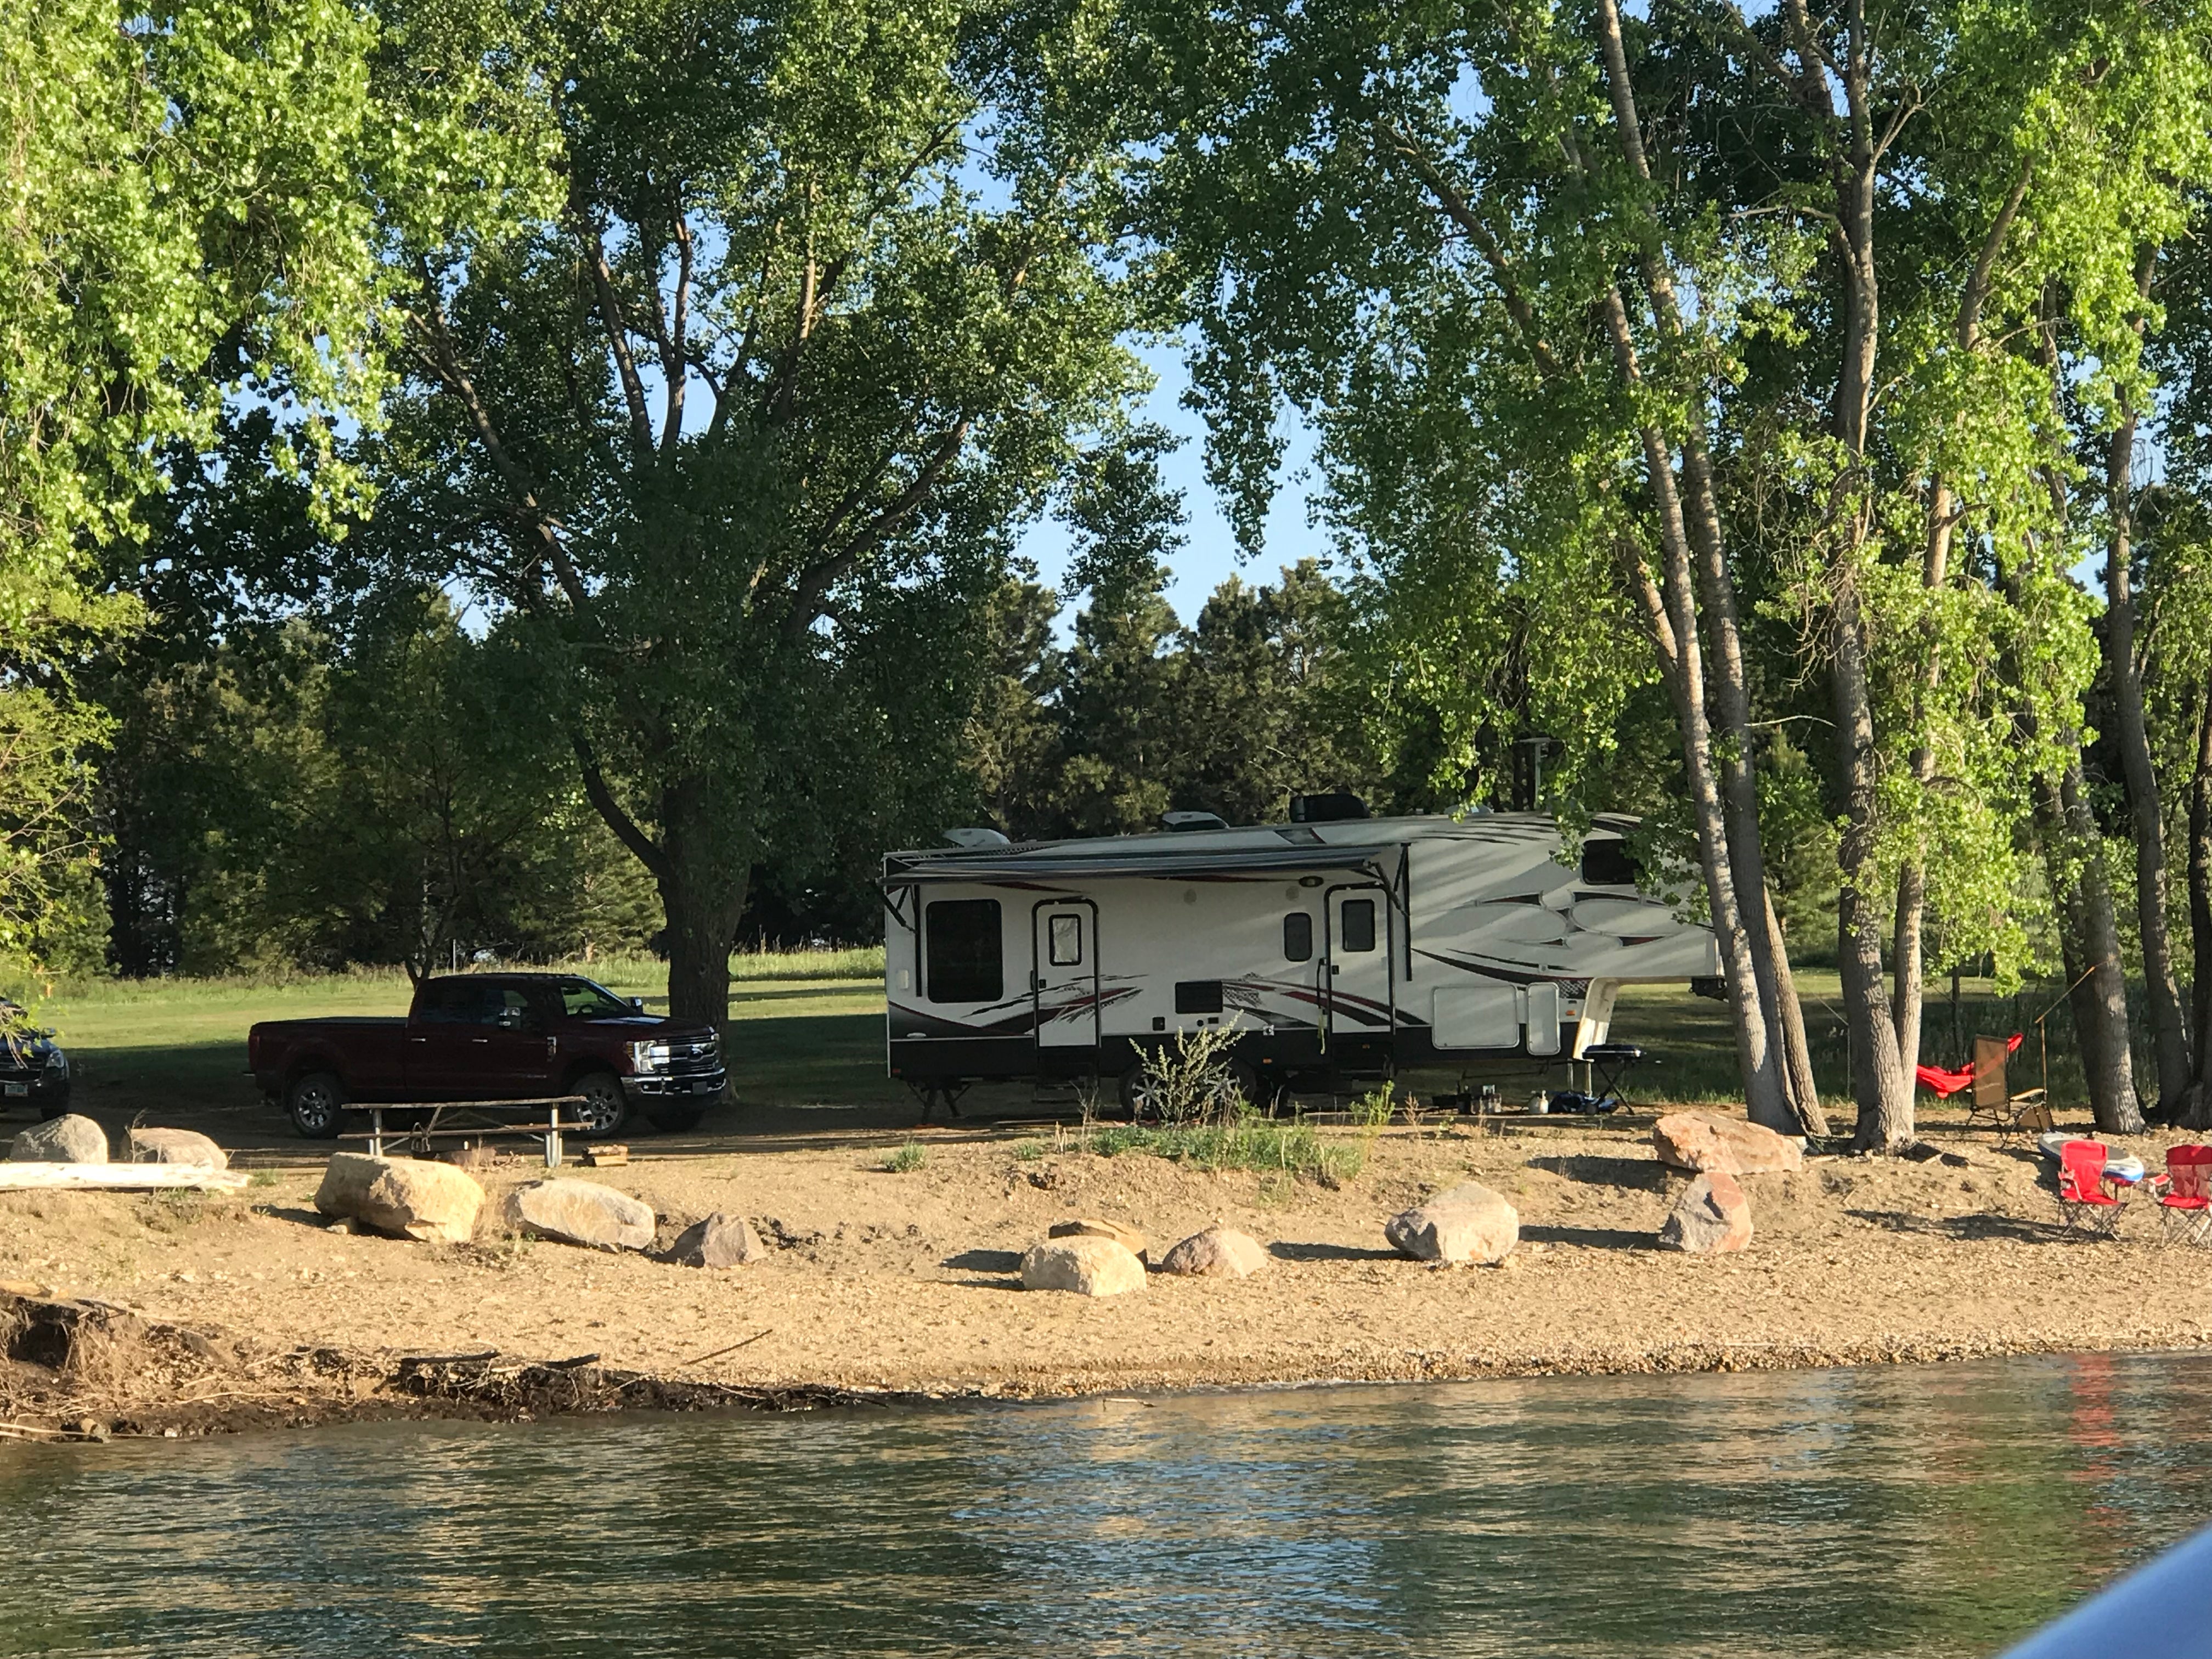 View of campsite from the water.